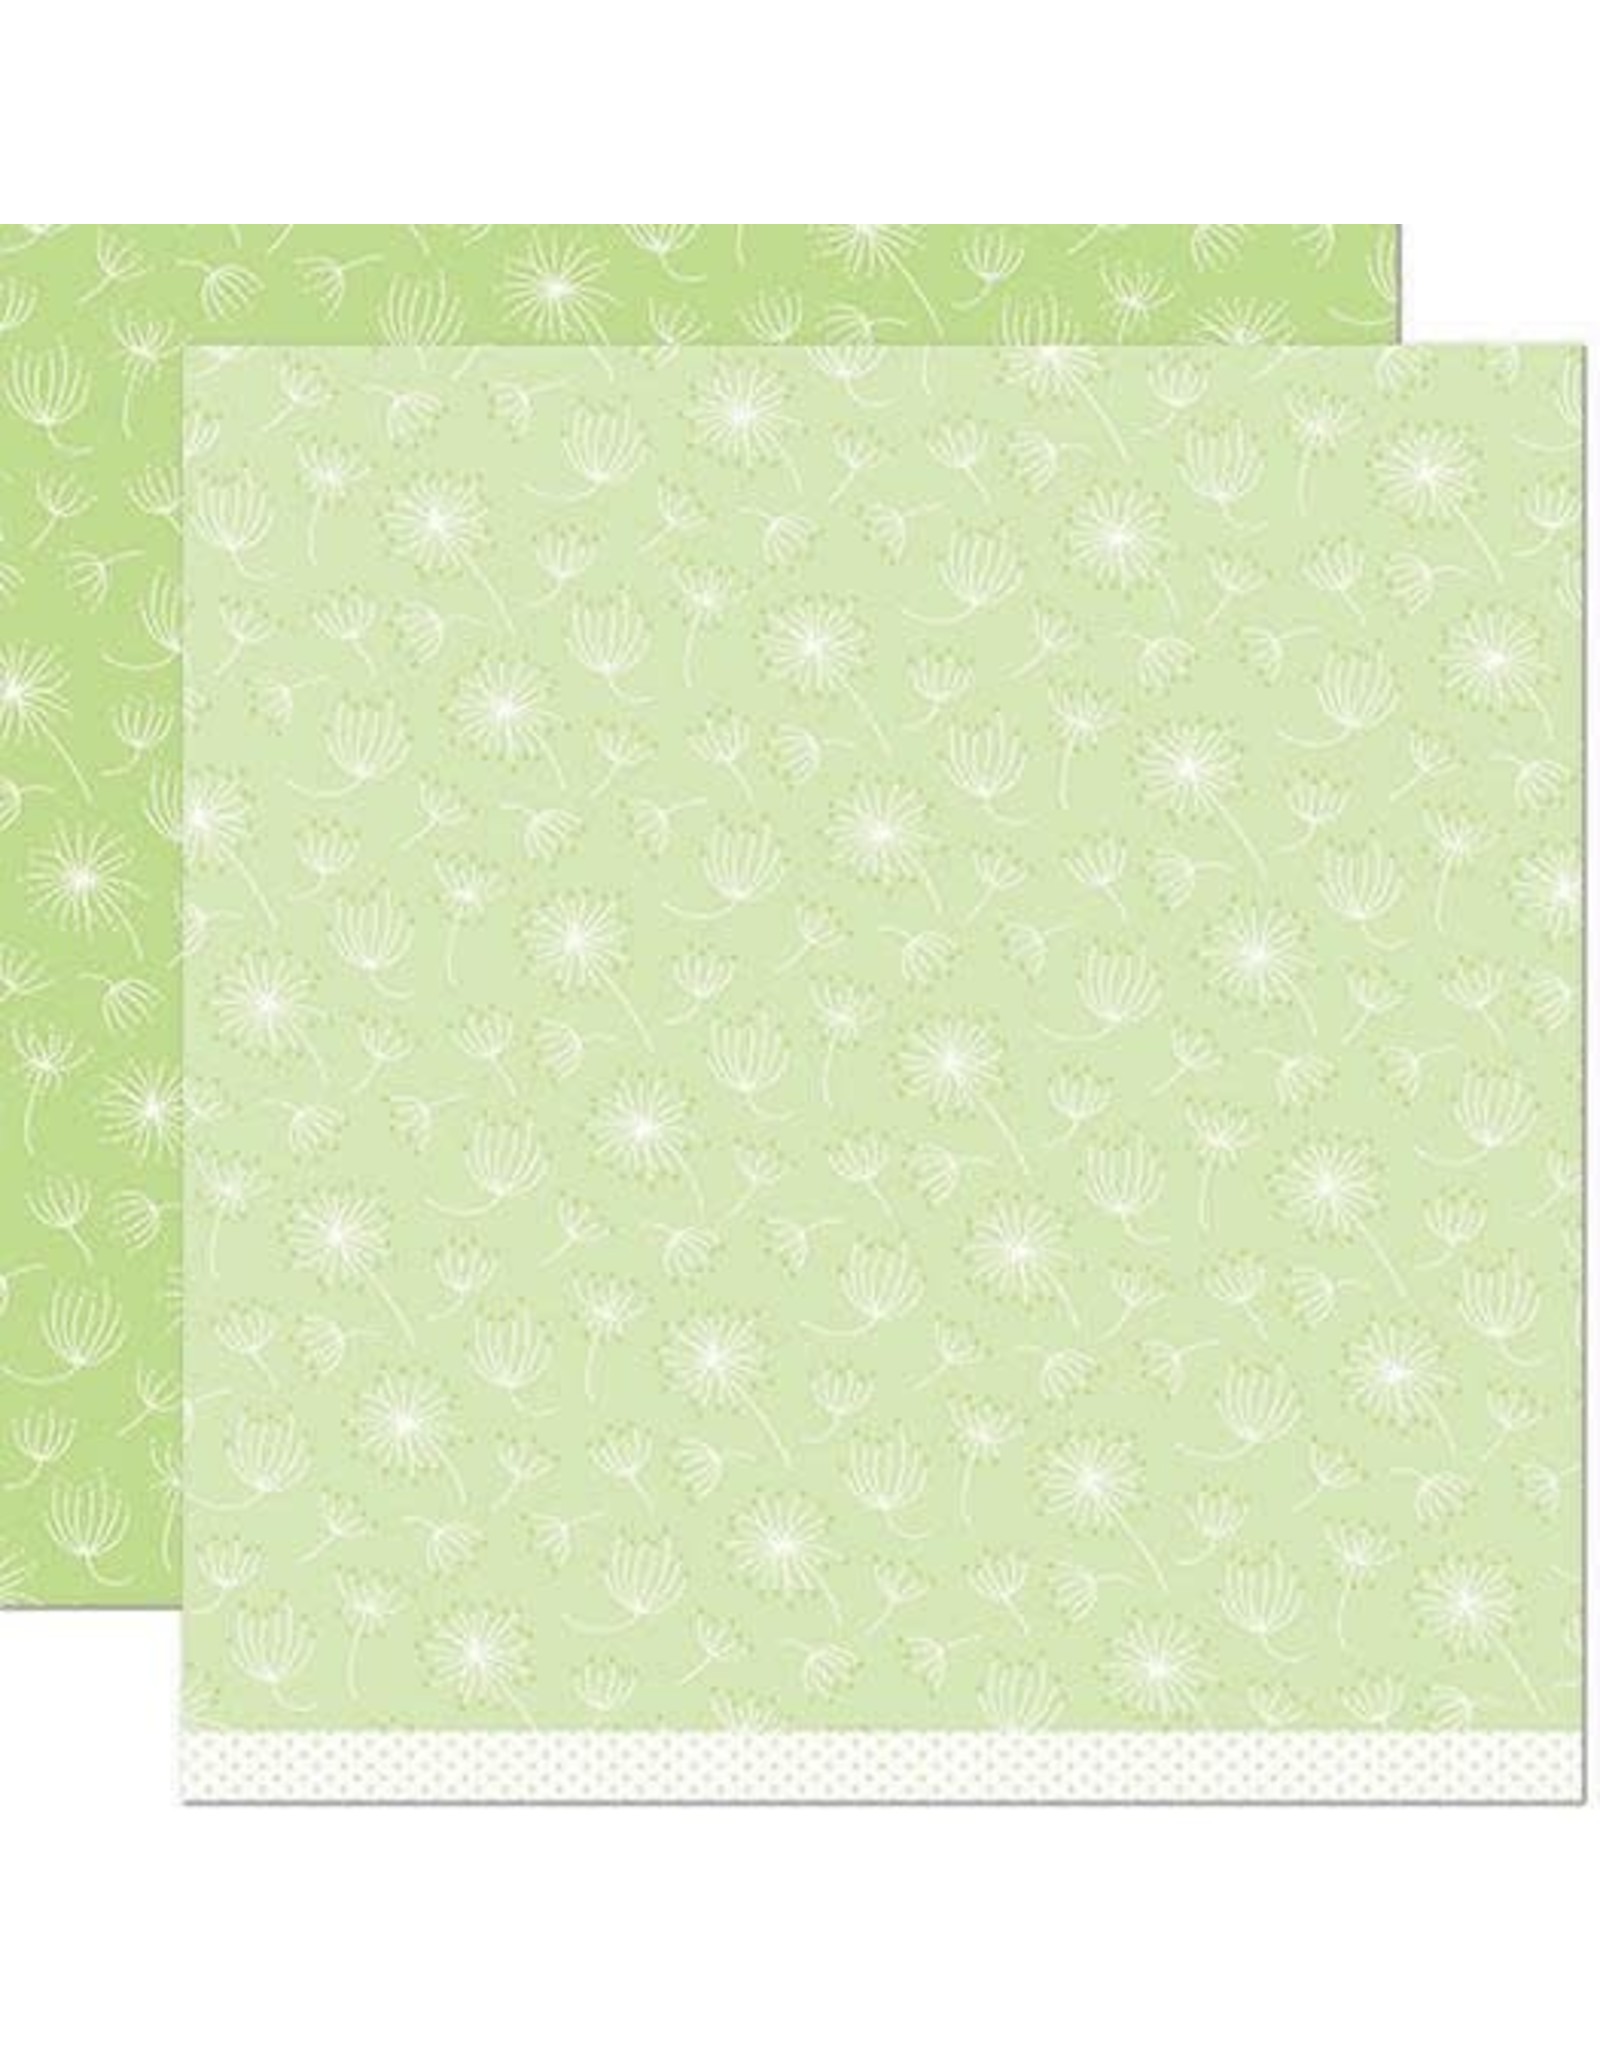 LAWN FAWN LAWN FAWN DANDY DAY DOUBLE-SIDED CARDSTOCK BE HUMBLE 12''X12''